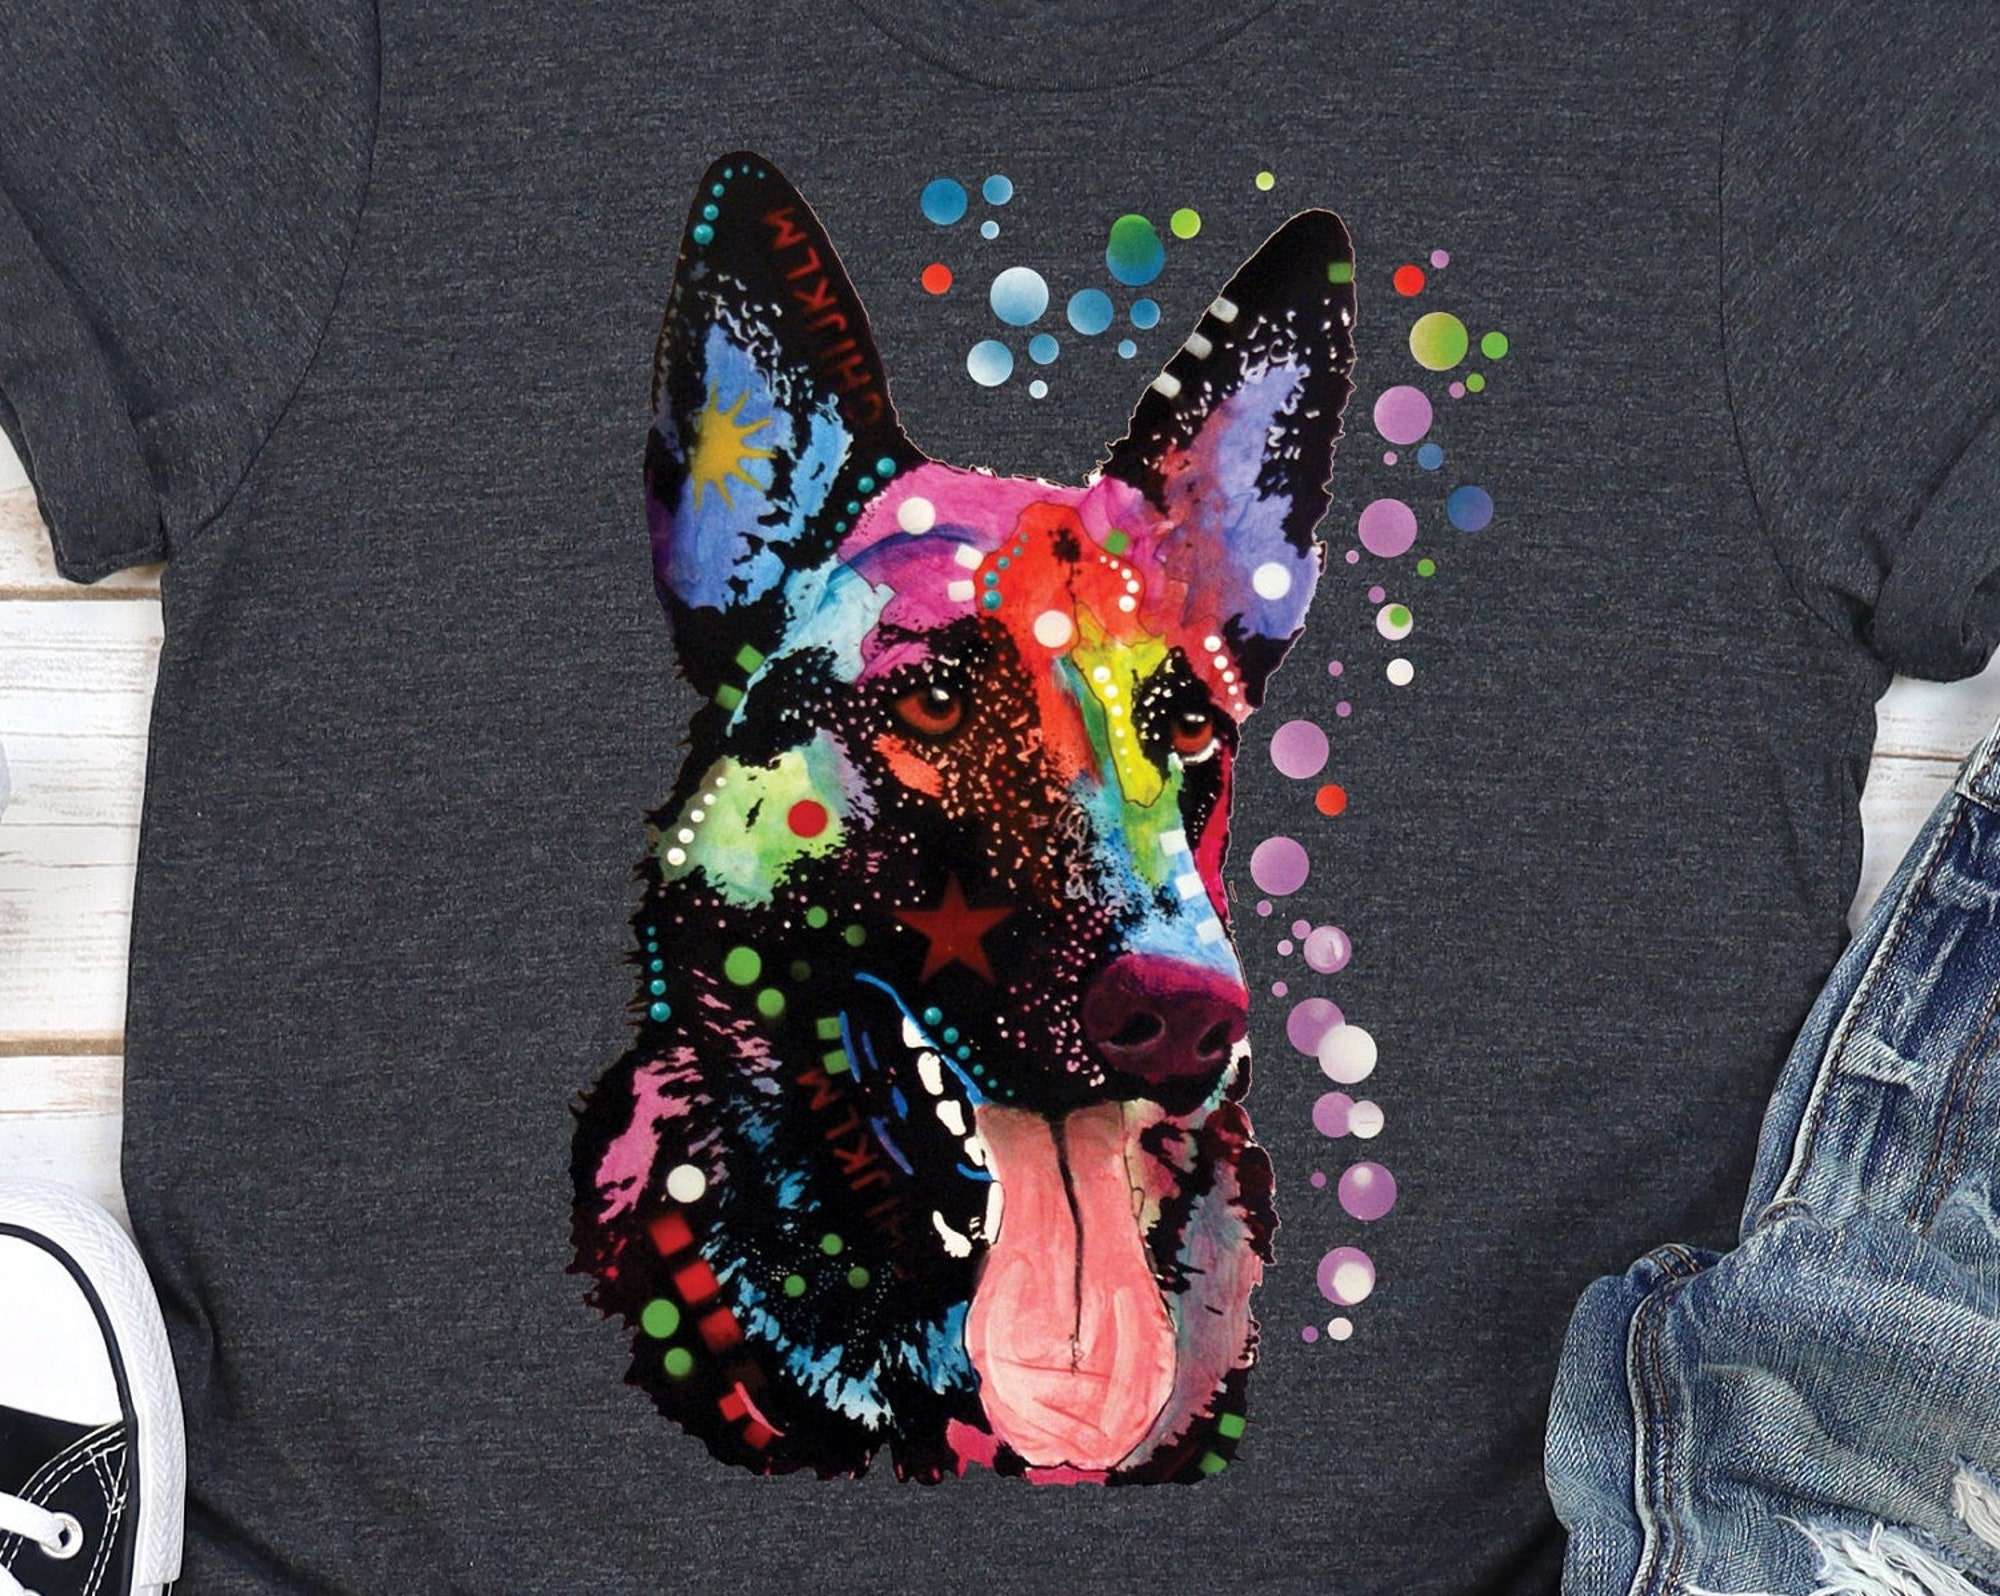 Discover German Shepherd T-shirt, Dog Breed Tee, Dean Russo Dogs Shirt, Neon, Colorful, Pets